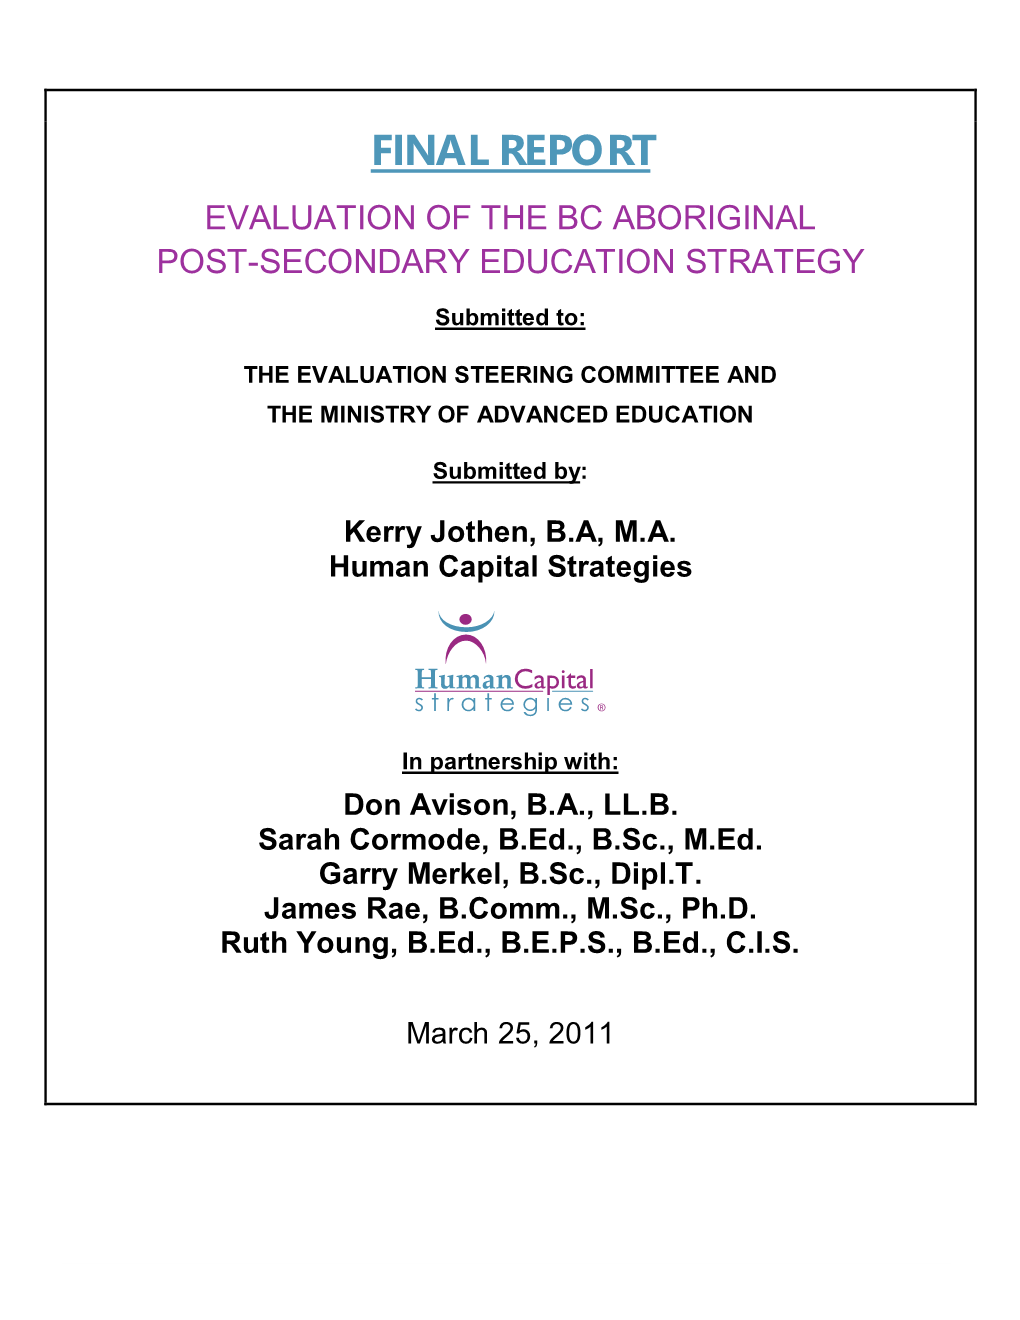 Final Report Evaluation of the Bc Aboriginal Post-Secondary Education Strategy